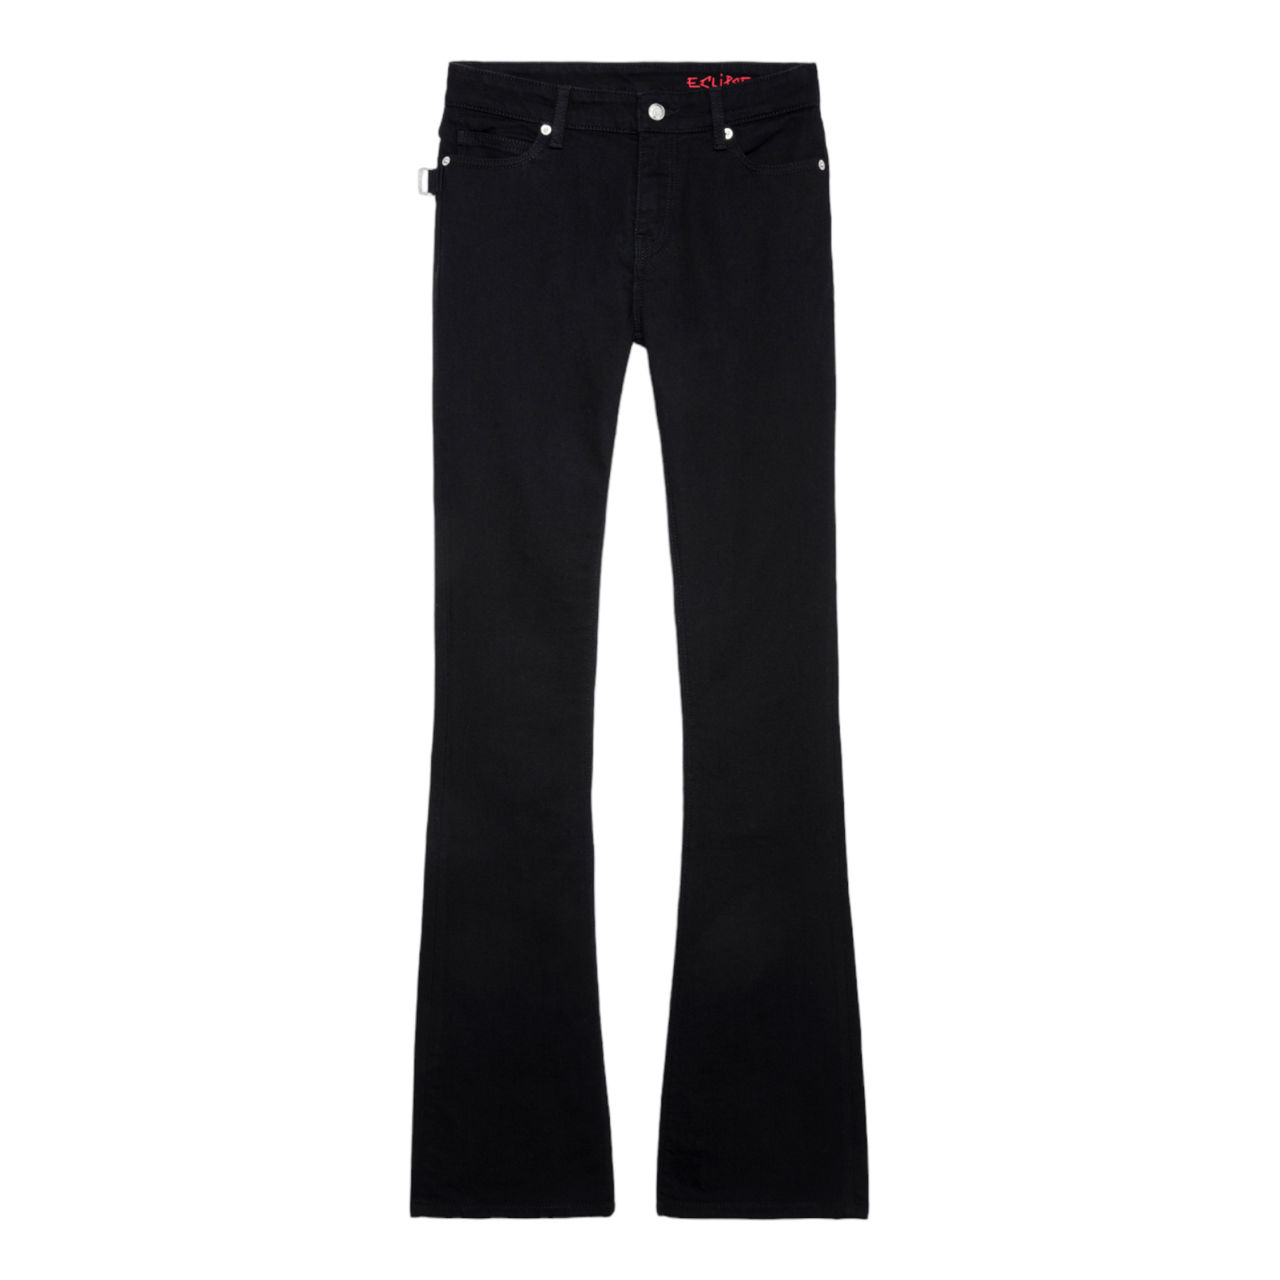 ZADIG&VOLTAIRE Eclipse Flared Leg Jeans